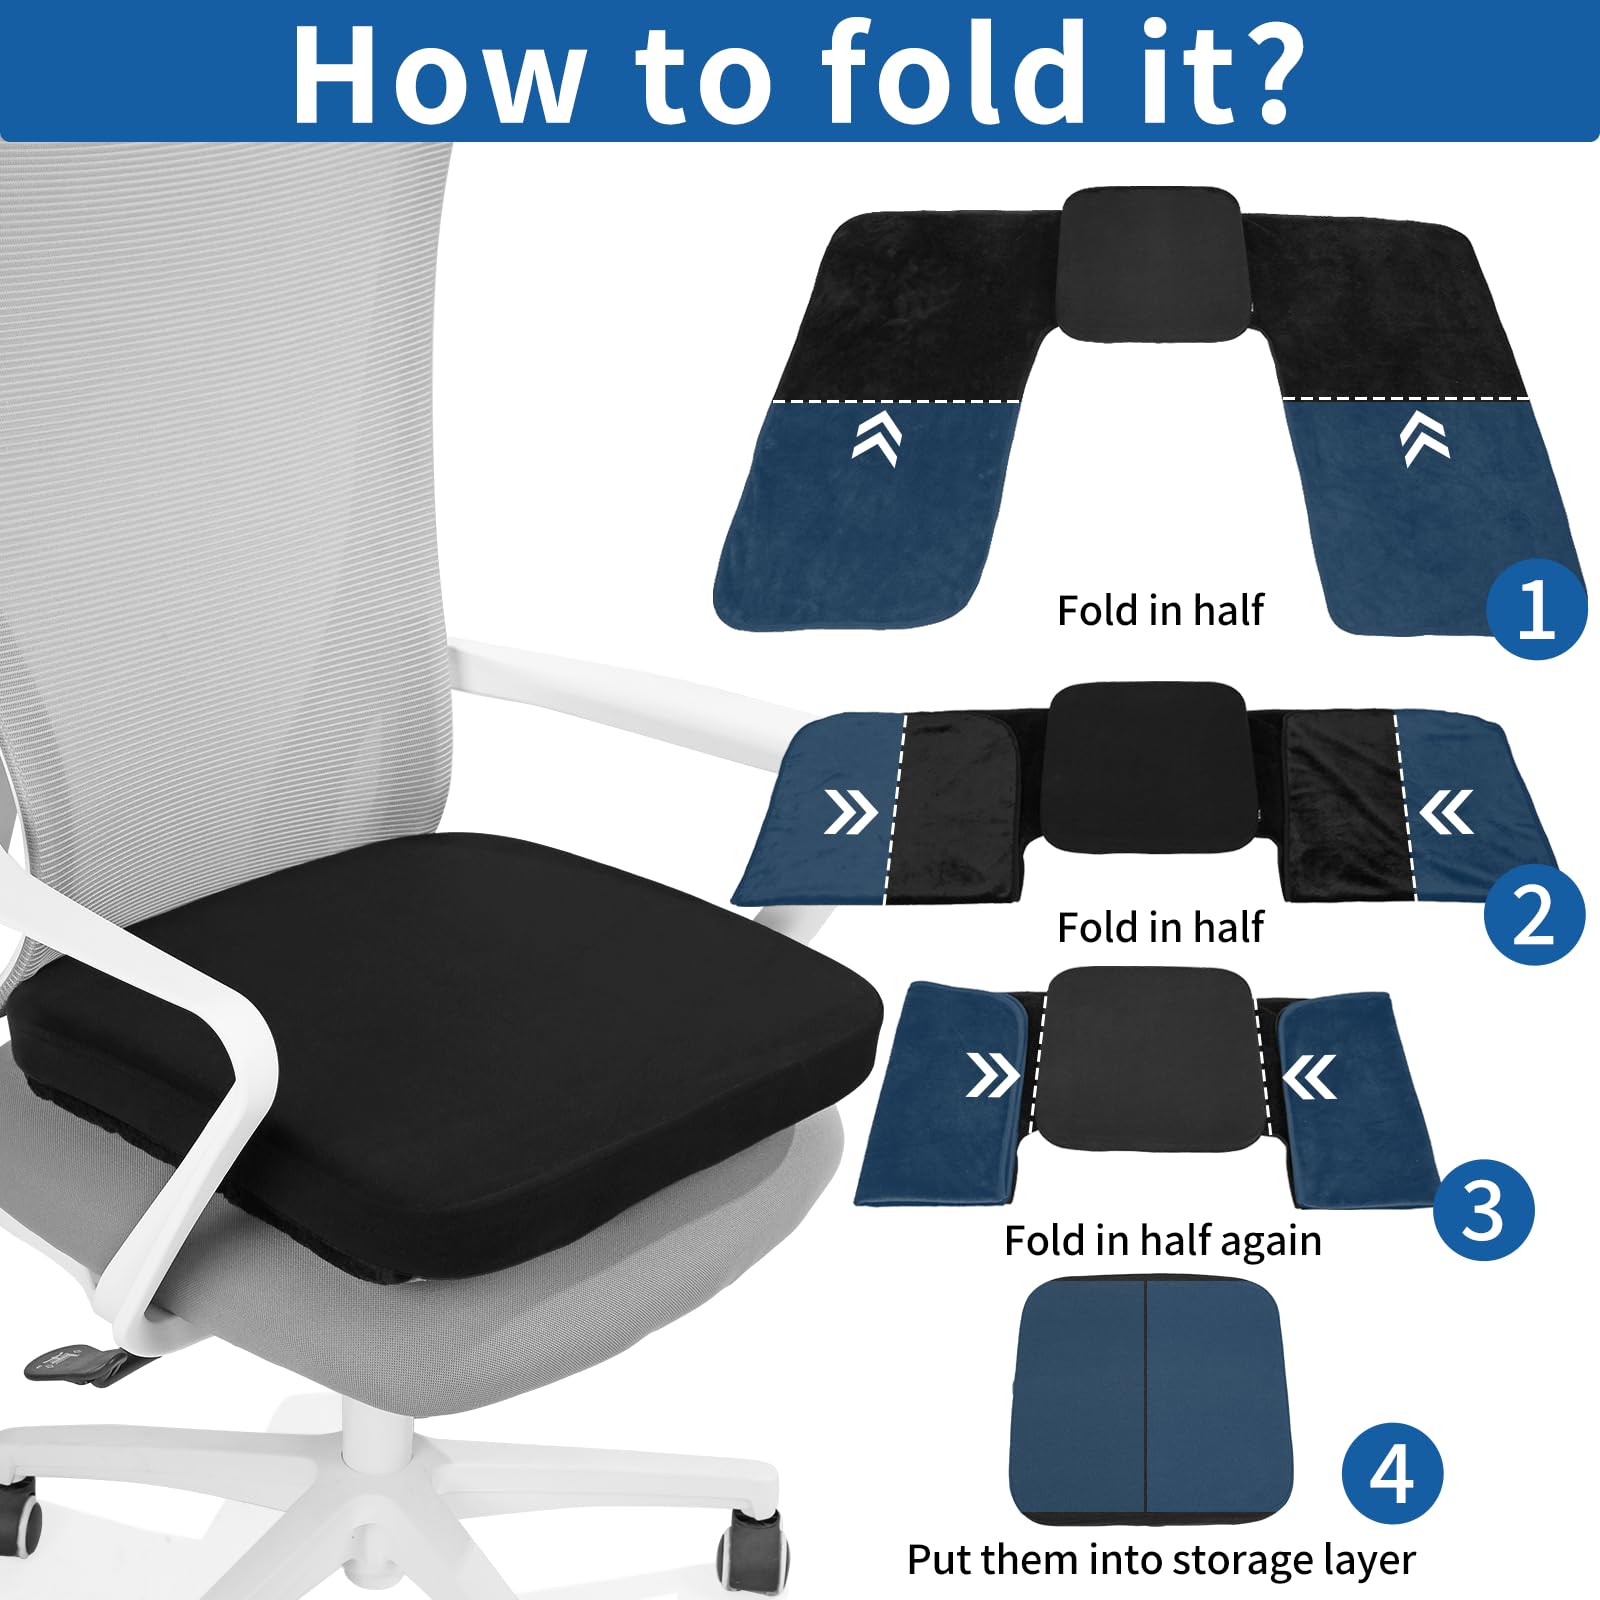 BUYUE Chair Cushion + Foldable Blanket 2 in 1, Comfortable High Density Foam Non-Slip Seat Cushion for Office Long Sitting, Soft Fleece Exclusive Patent Chair Pads for Desk Computer Chair, Gray